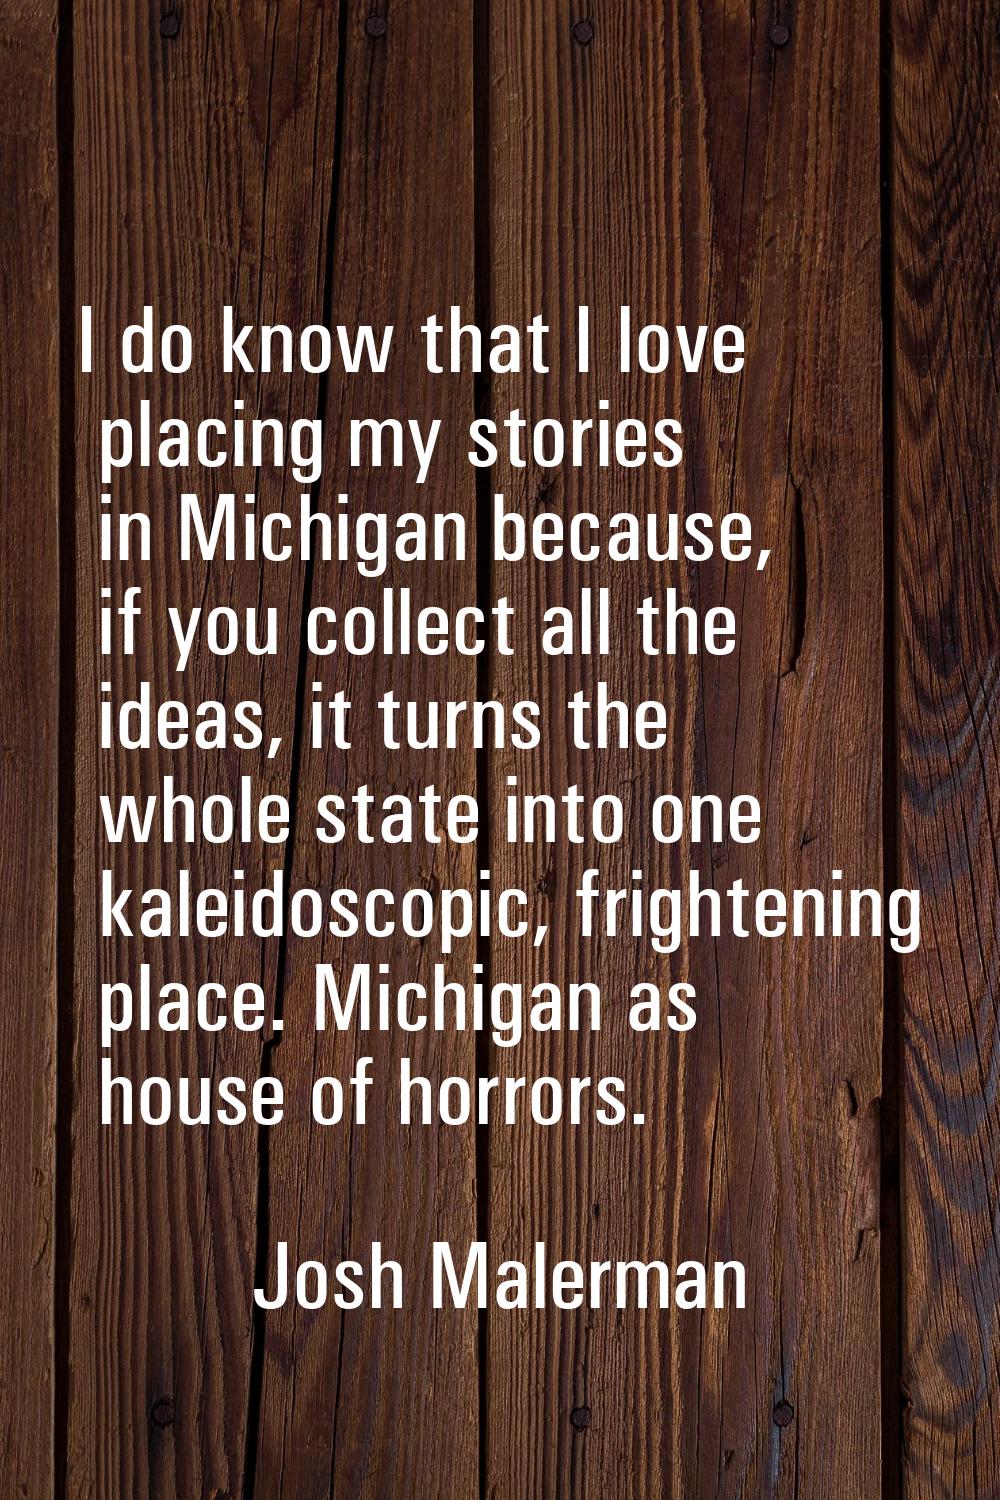 I do know that I love placing my stories in Michigan because, if you collect all the ideas, it turn